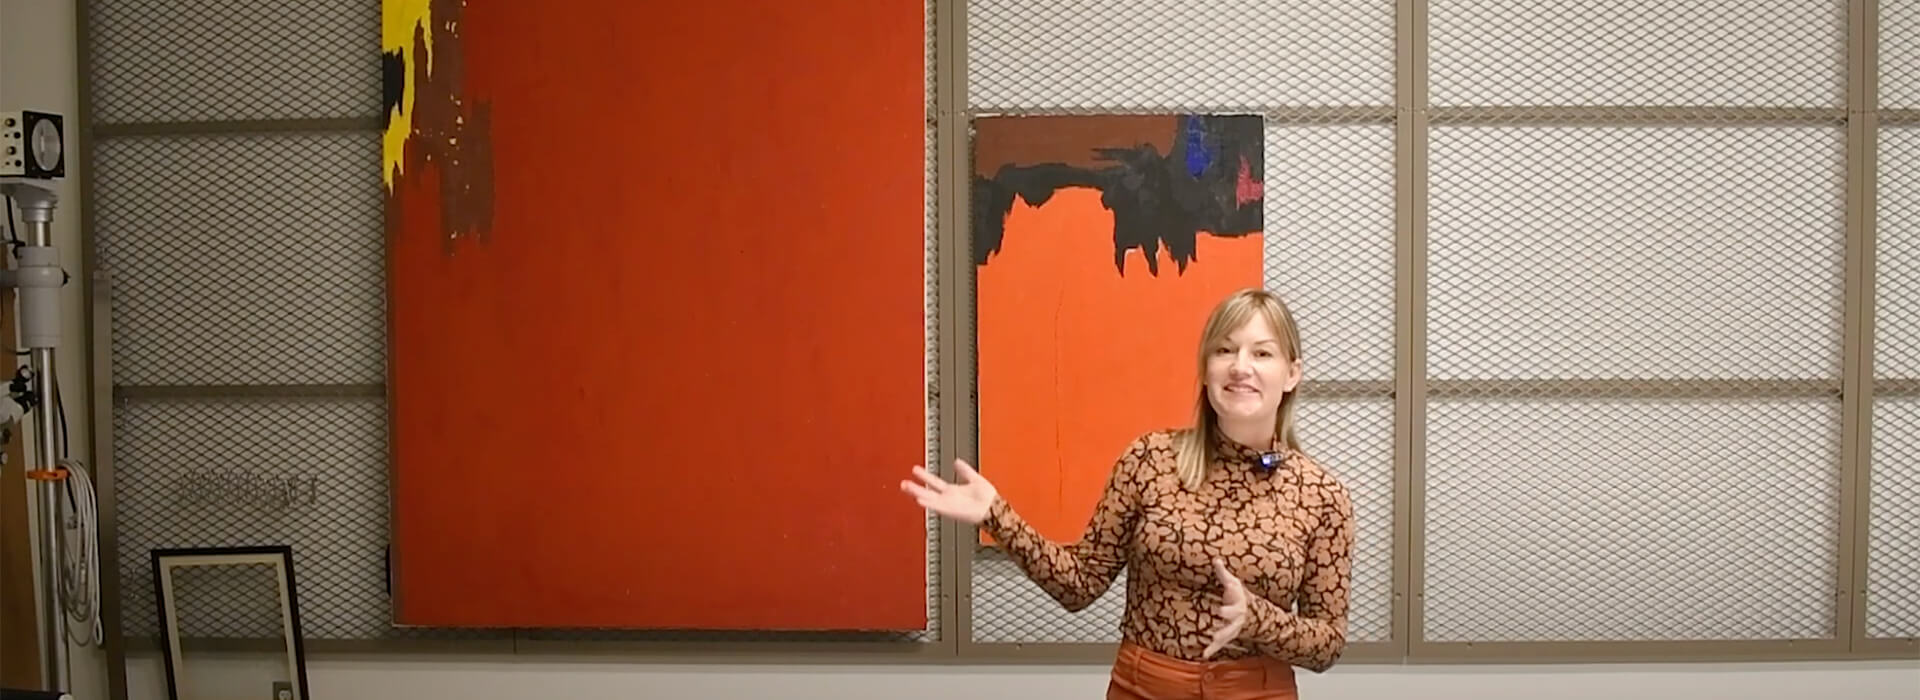 Bailey Placzek stands in front of two abstract paintings hanging on wire panels and gestures toward one.